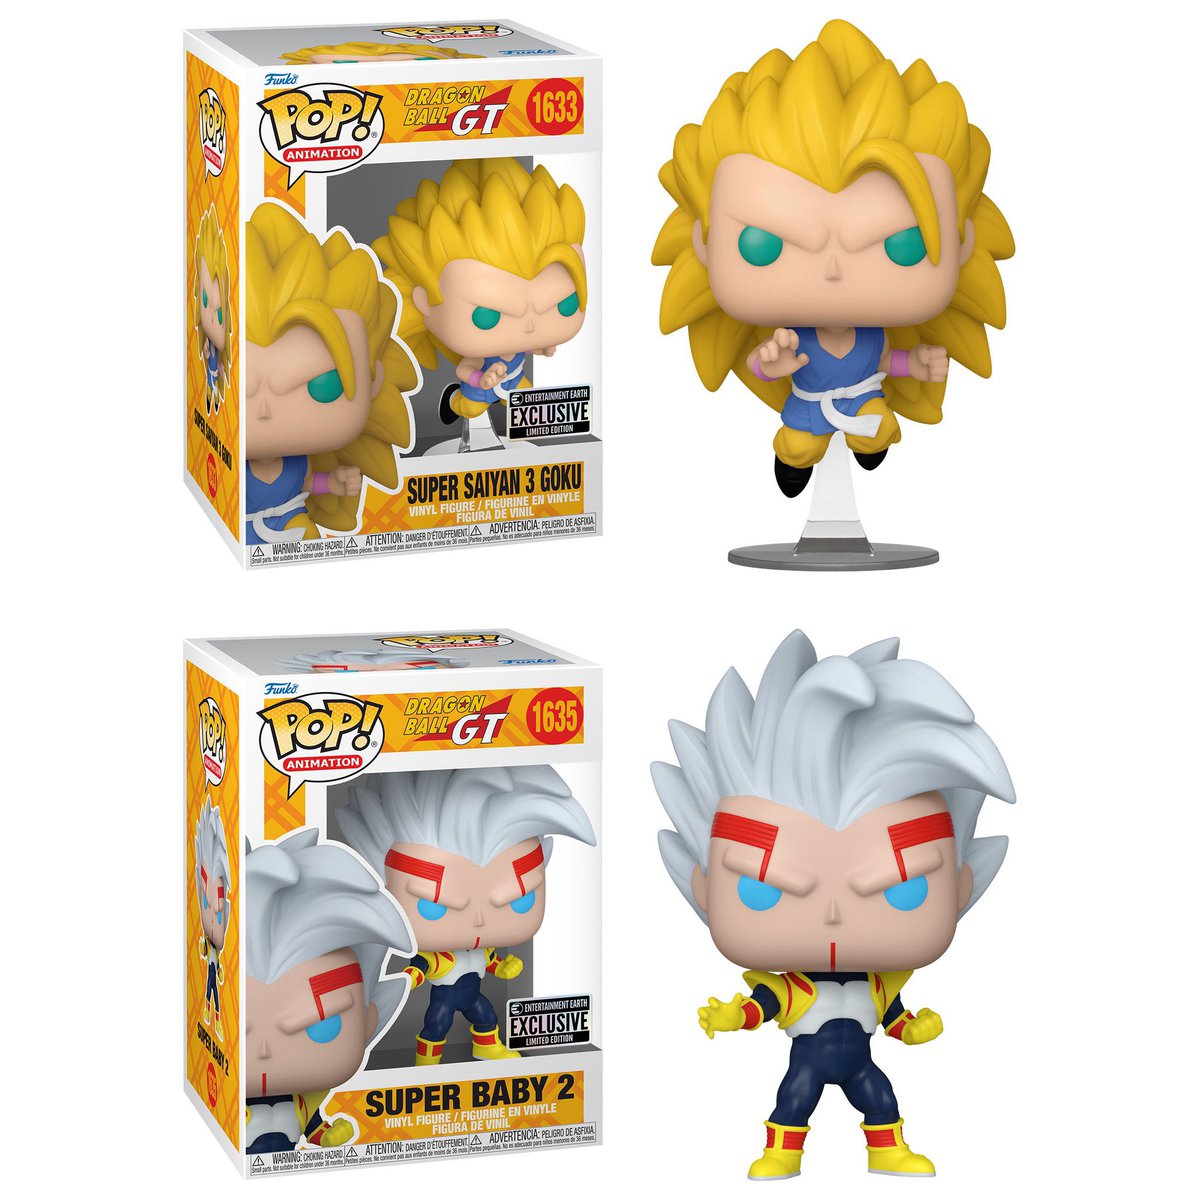 Closer look at the Entertainment Earth Exclusive Funko Pop! Dragon Ball GT, showcasing Super Saiyan 3 Goku and Super Baby 2. Available online starting today at 9 AM PT / 12 PM ET!

Link: ee.toys/OZ6QQV

#Ad #DragonBall #DragonBallGT #Funko #FunkoPop #FunkoPops…